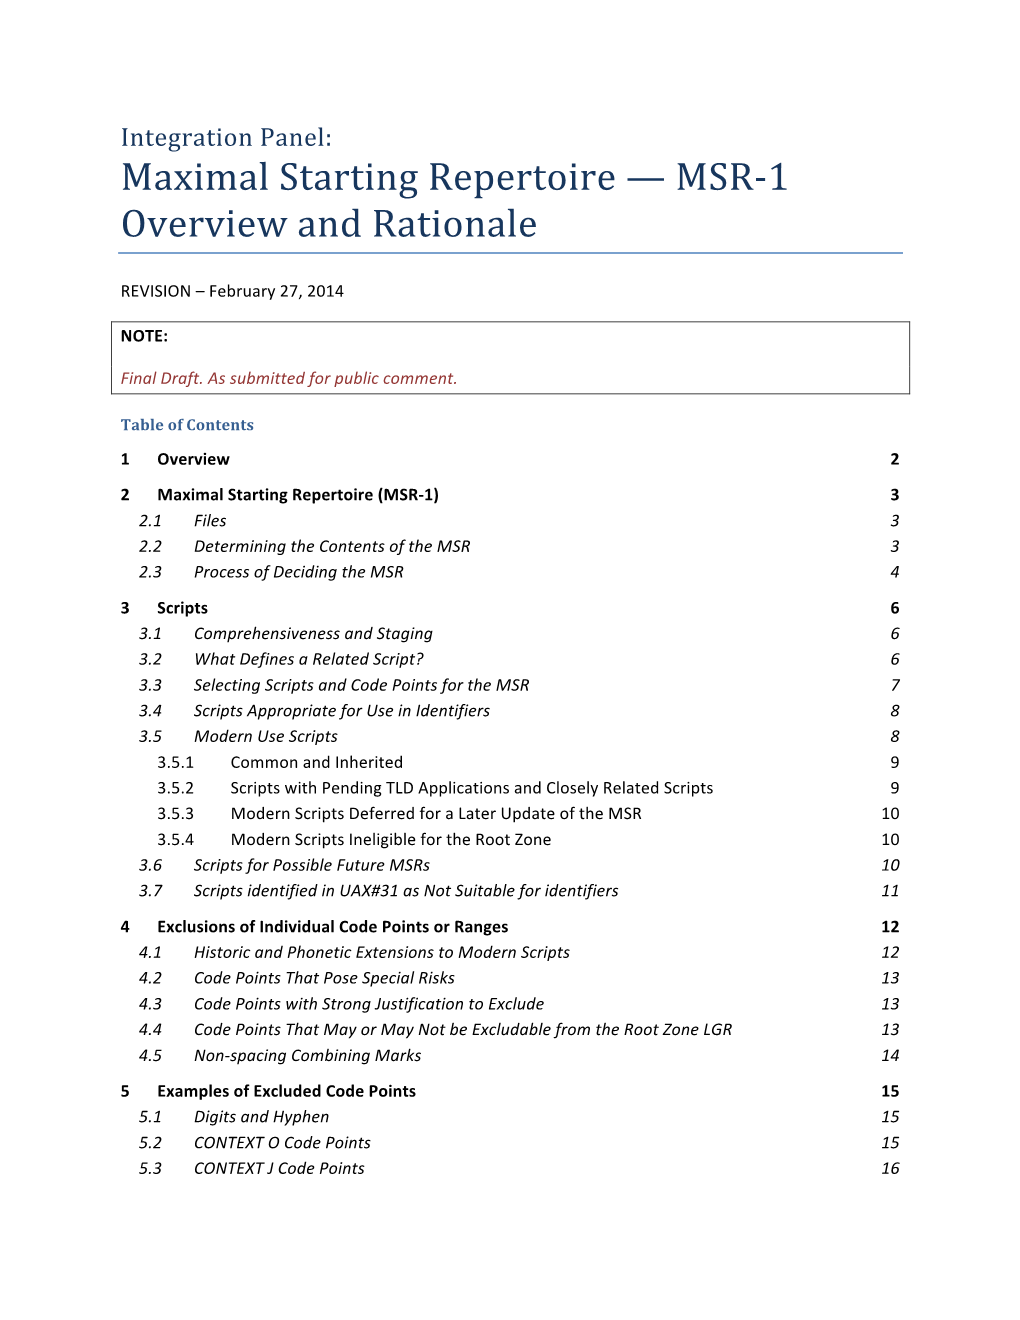 Maximal Starting Repertoire — MSR-1: Overview and Rationale